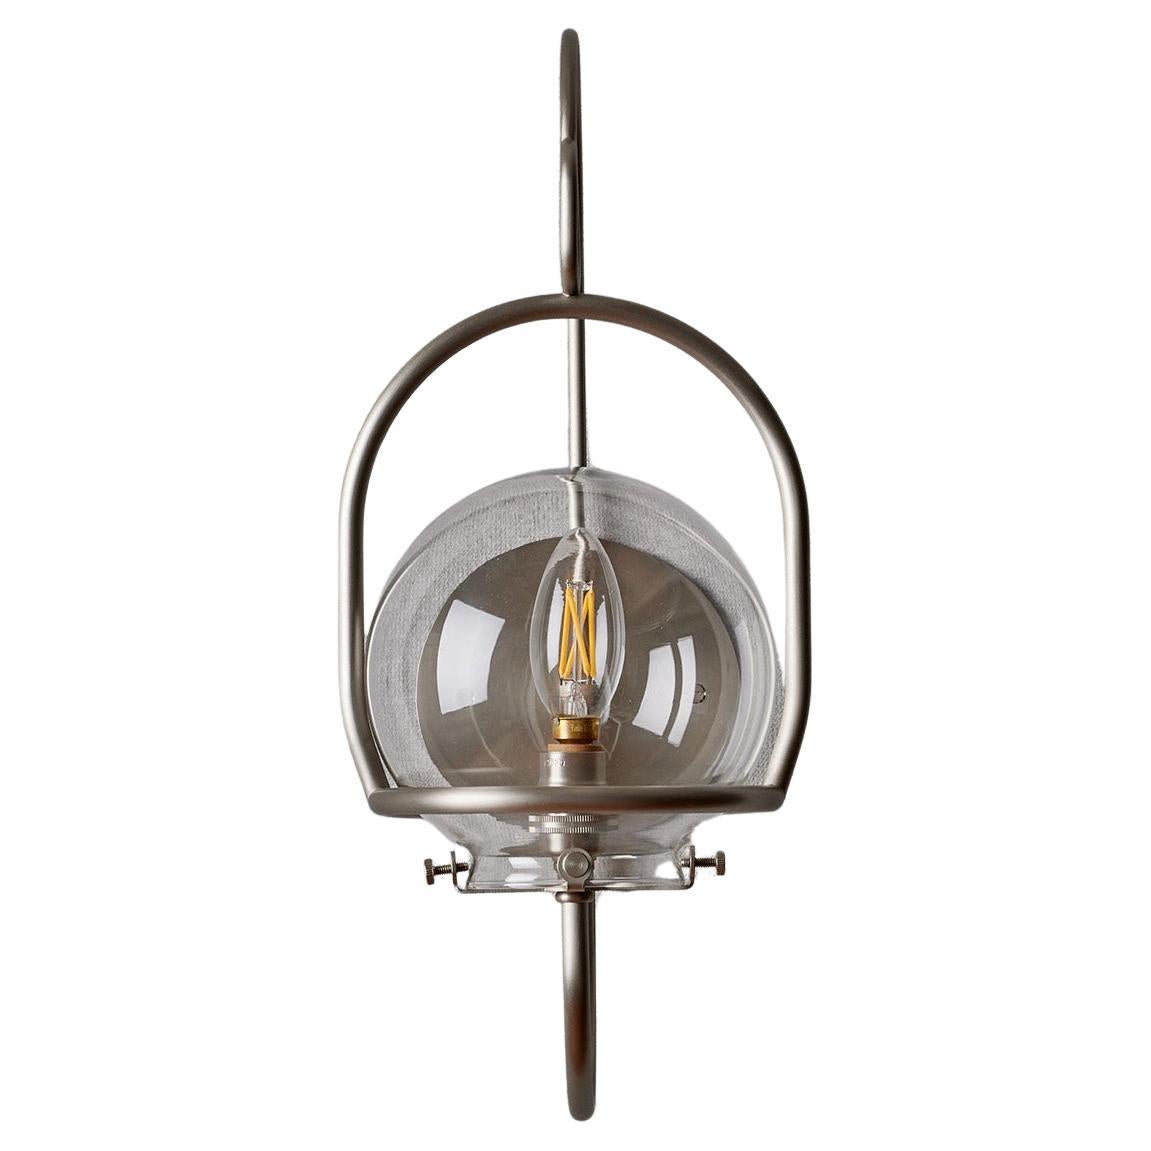 Brushed Satin Nickel Emil Lantern - Small - Indoor Use For Sale